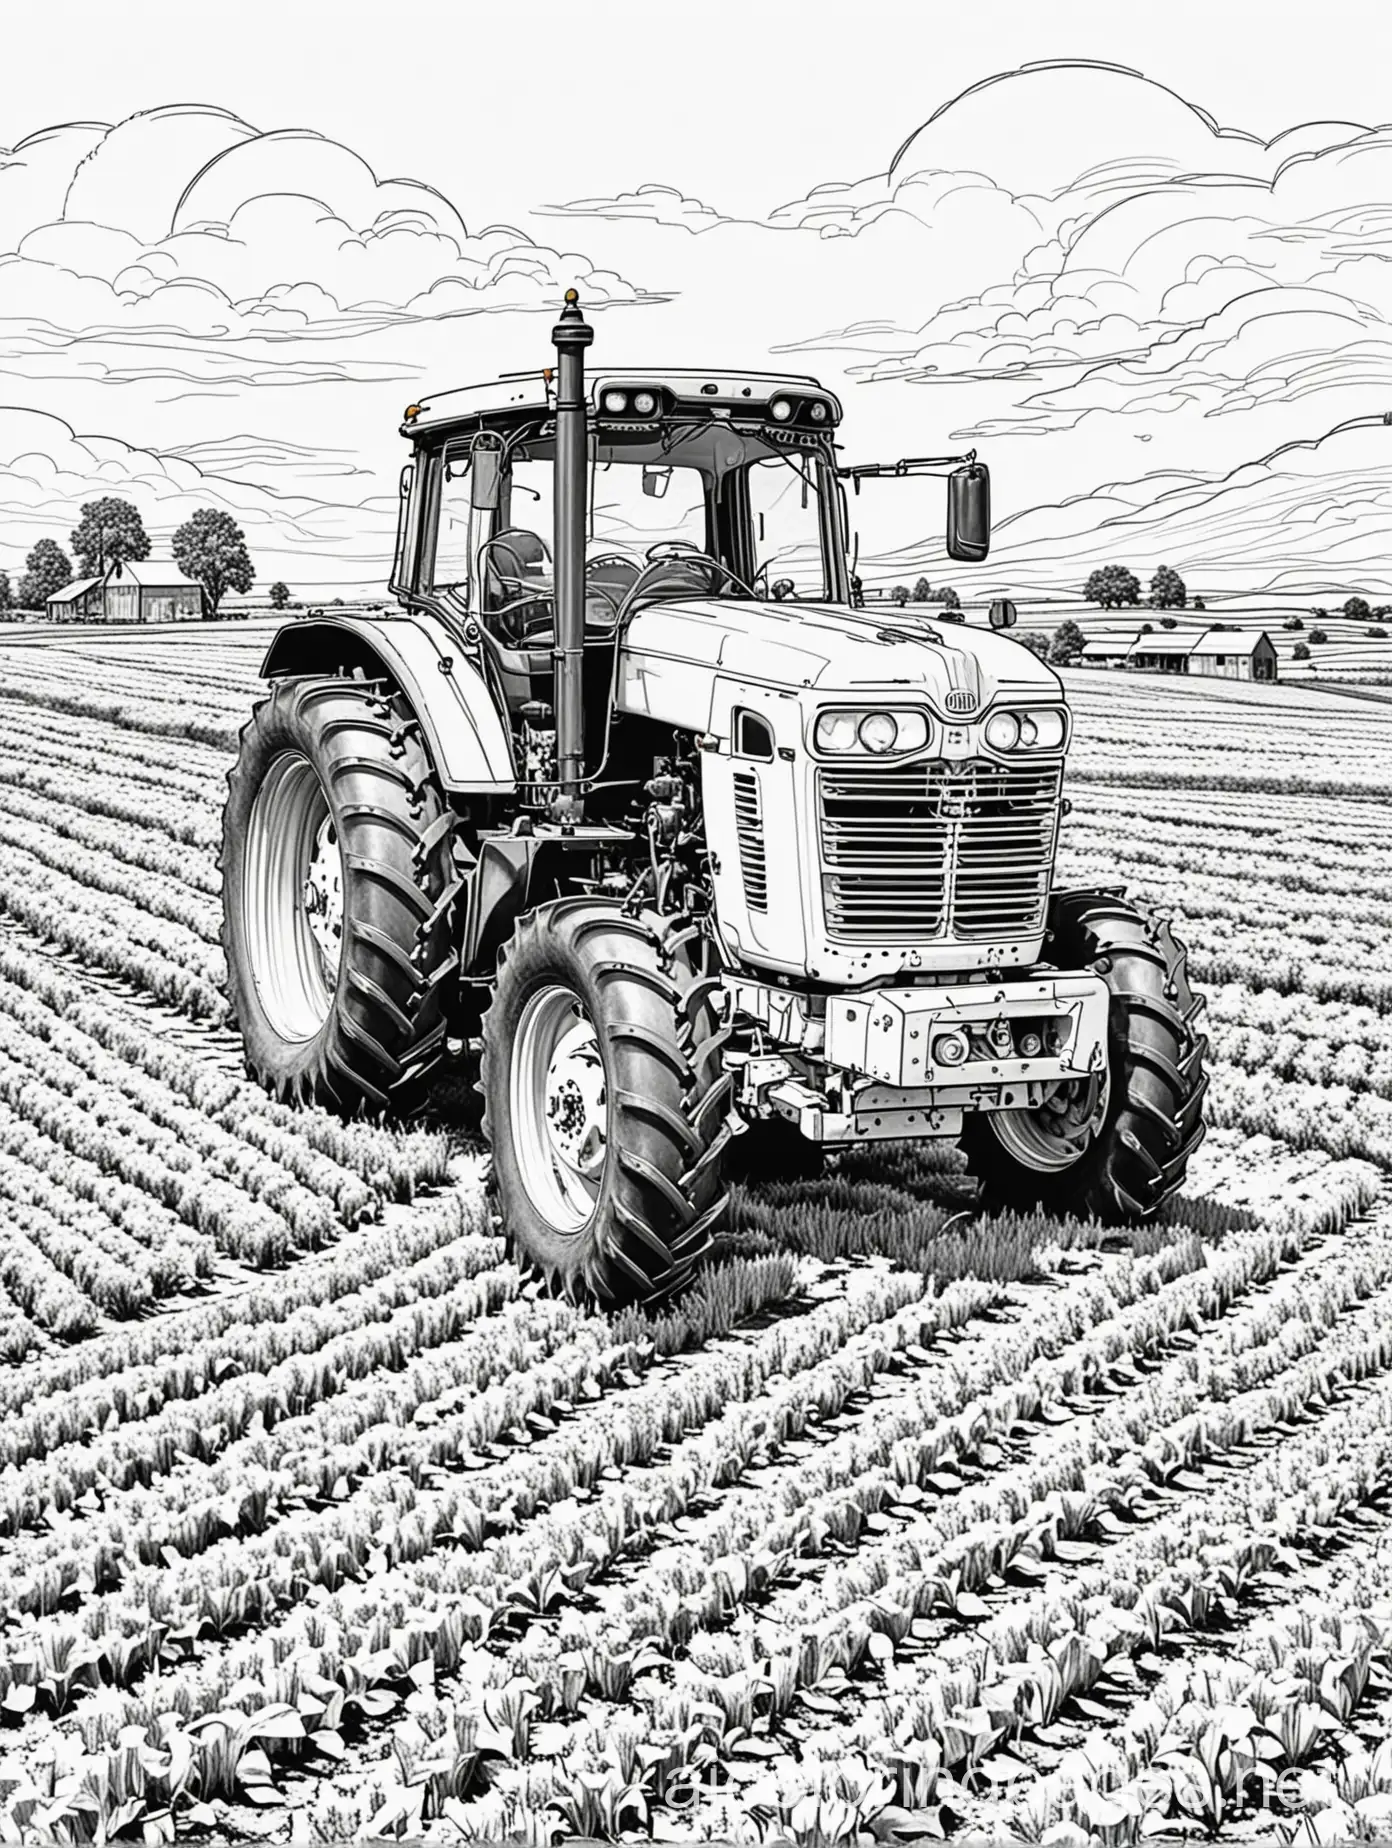 Coloring pages, tractor in the field on a farm with crops, bold coloring lines, Coloring Page, black and white, line art, white background, Simplicity, Ample White Space